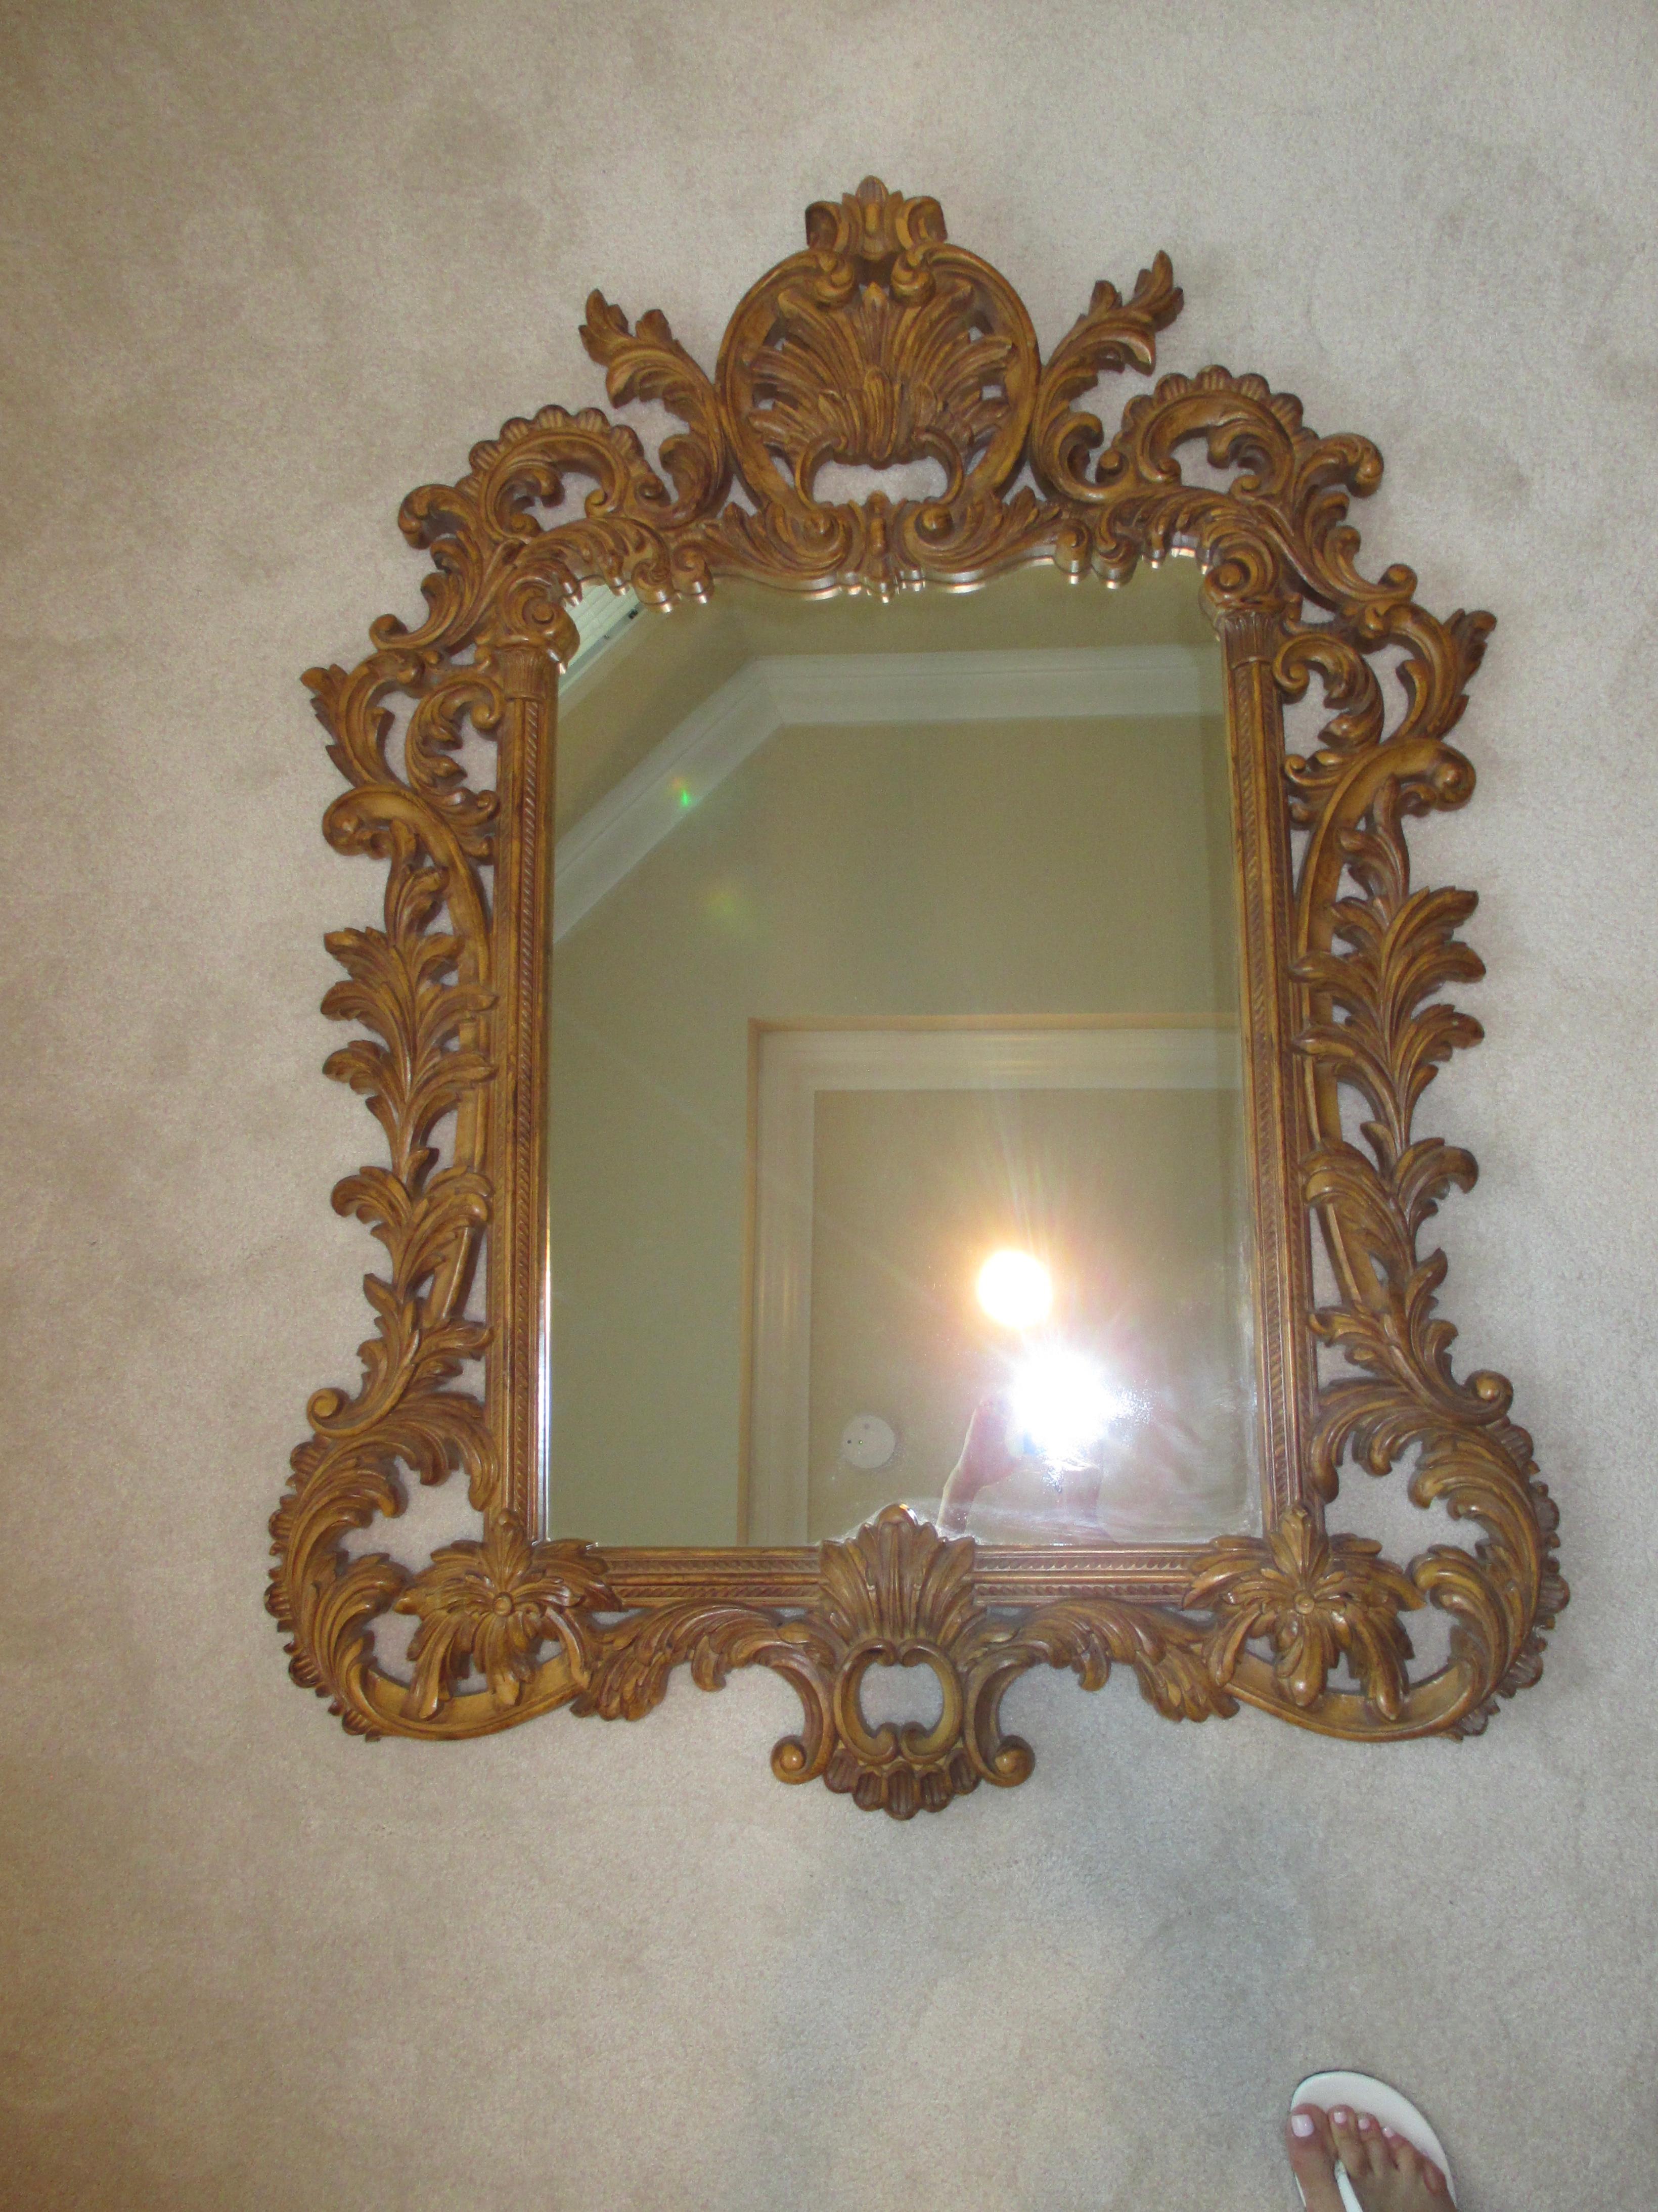 Stunning gold ornate mirror with hanging hardware attached.
 